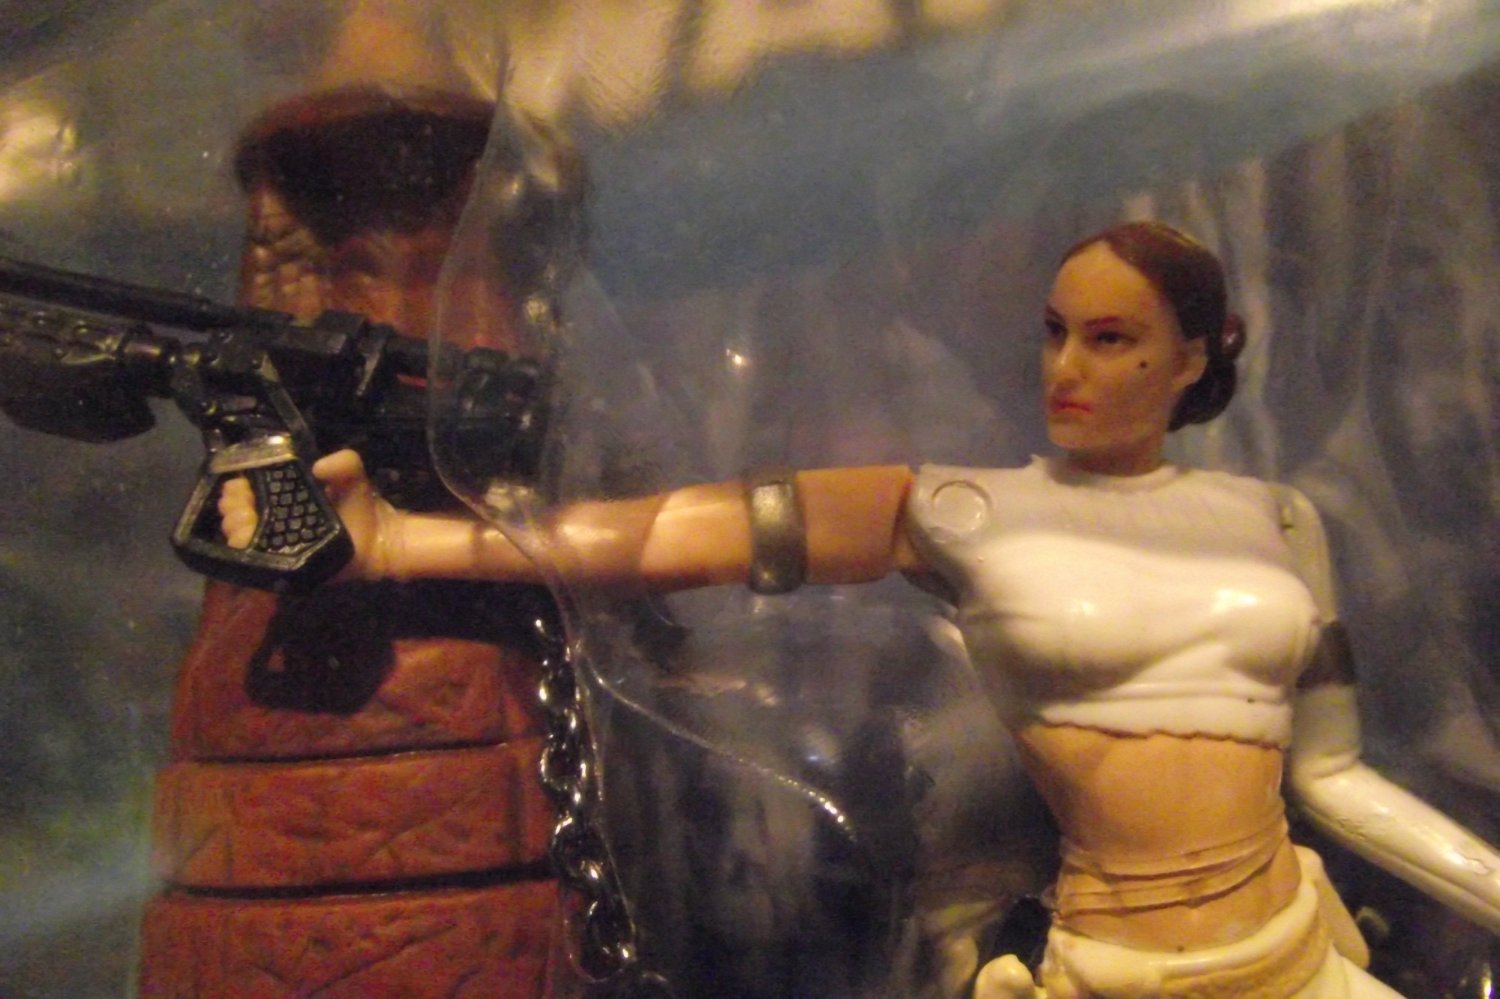 Star Wars Padme Amidala Ep2 Tied Gun To Hand And Mole On Cheek Also Bkgd Card